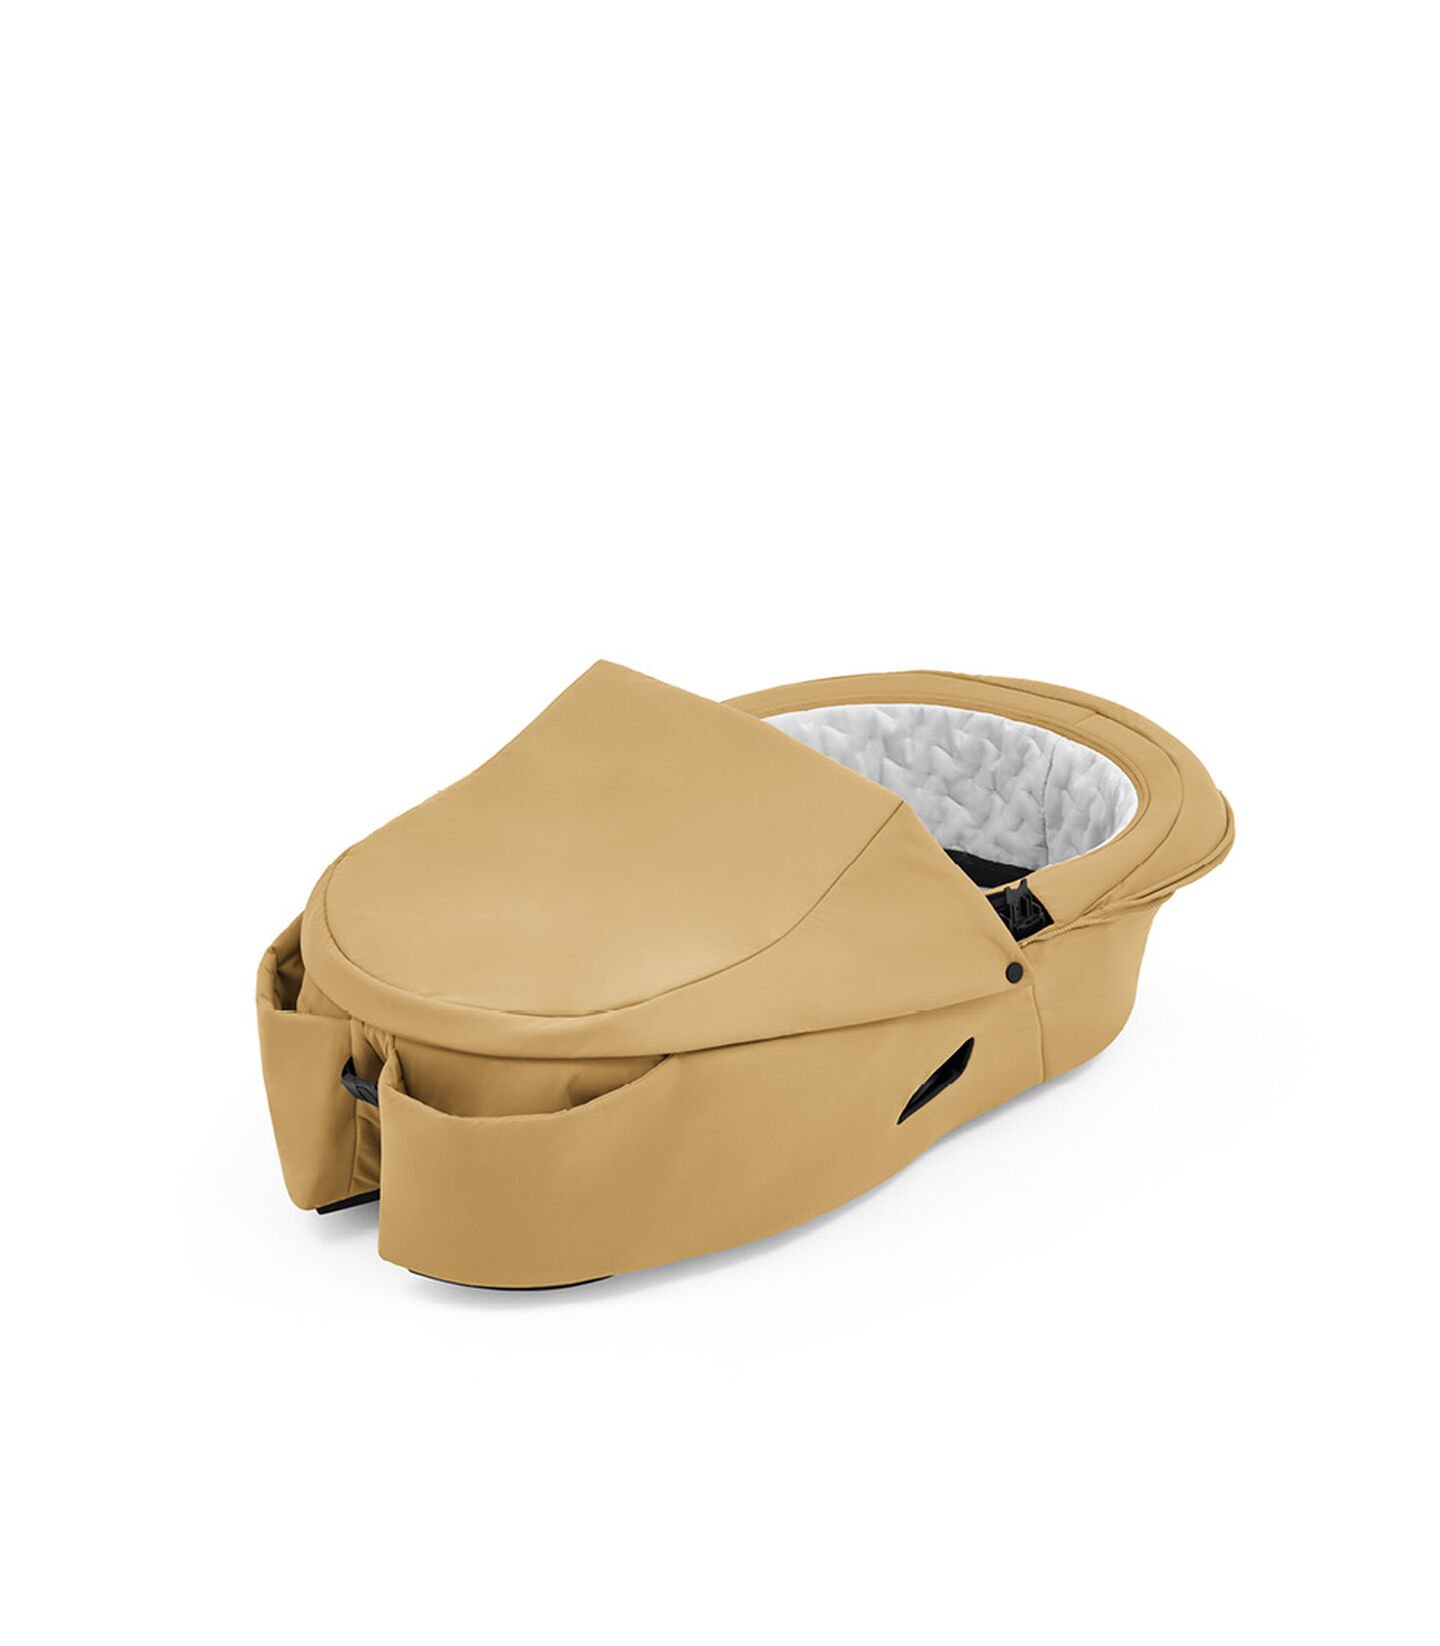 Stokke® Xplory® Liggedel Golden Yellow, Golden Yellow, mainview view 1